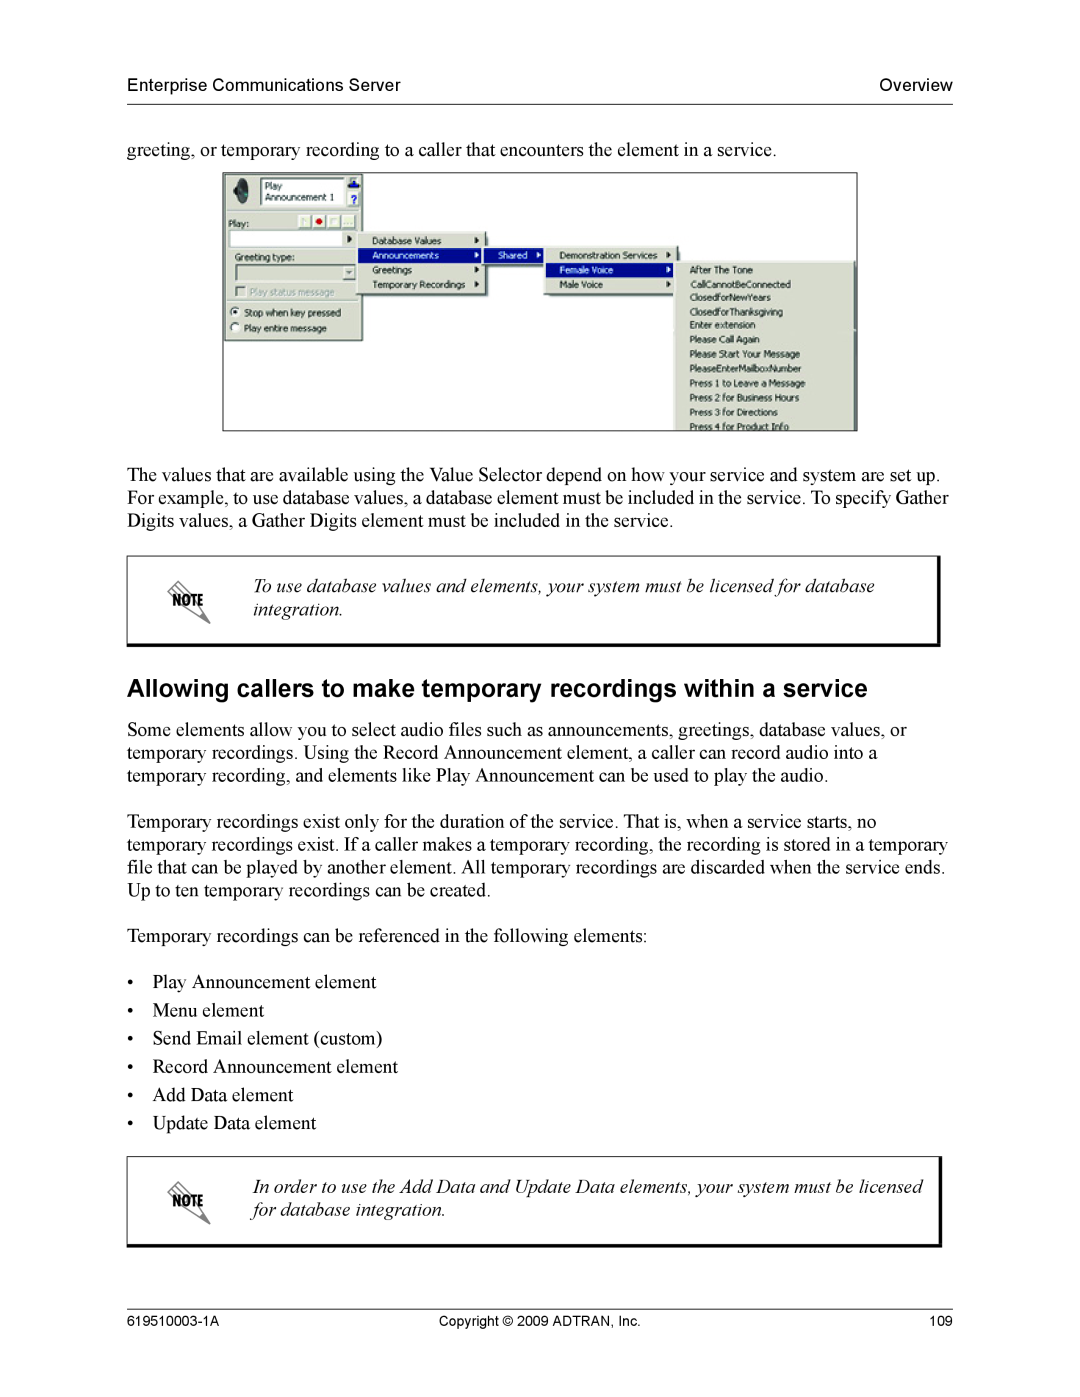 ADTRAN 619510003-1A manual Allowing callers to make temporary recordings within a service 